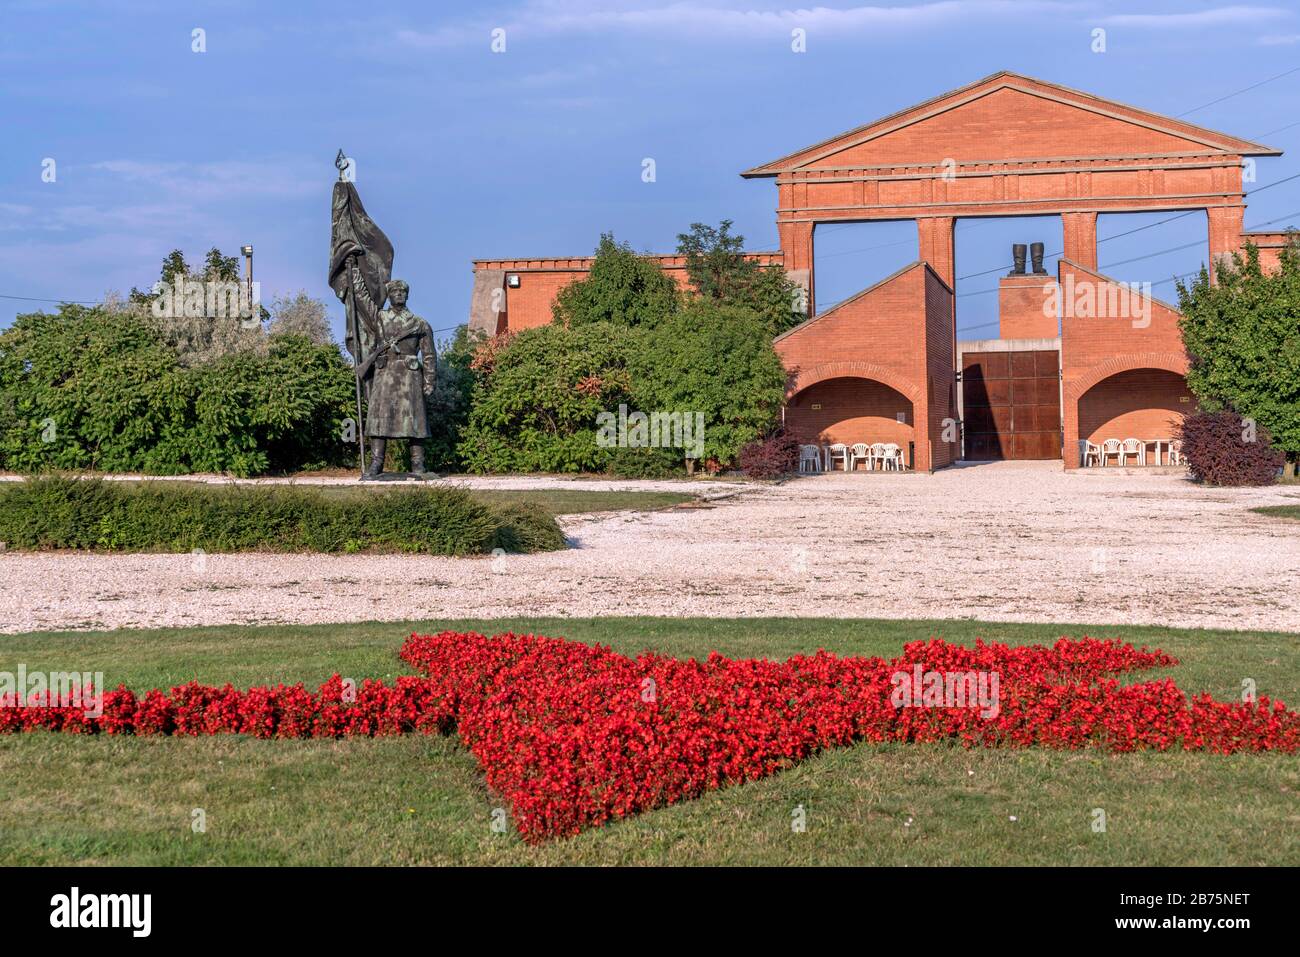 Hungary, Budapest, 09.09.2017. Memento Park in Budapest on 09.09.2017. The Kulisenwand with Stalin's boot in the background. Memento Park is a memorial cemetery, here rest the monuments that stood on public squares during the years of socialism and were removed from Budapest's streets after the political change in 1989-1990. Red star, memorial and scenery band [automated translation] Stock Photo